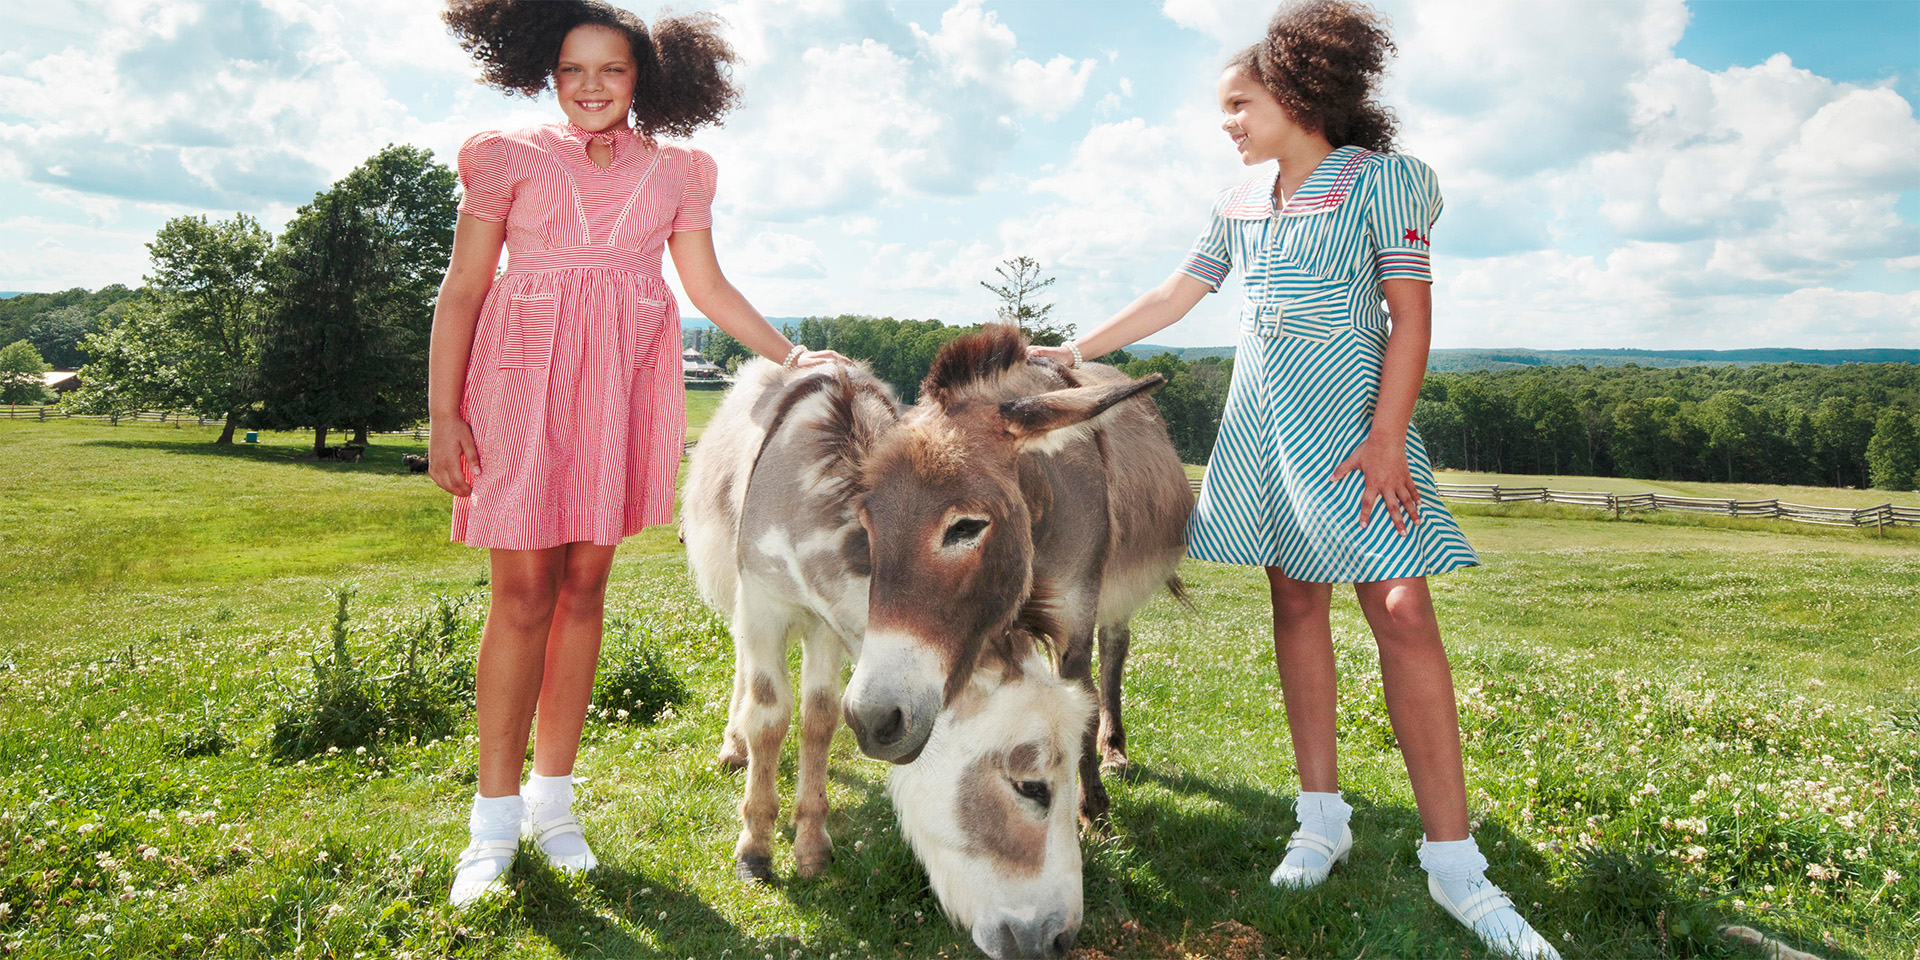 Girls pet a Donkey at the petting zoo